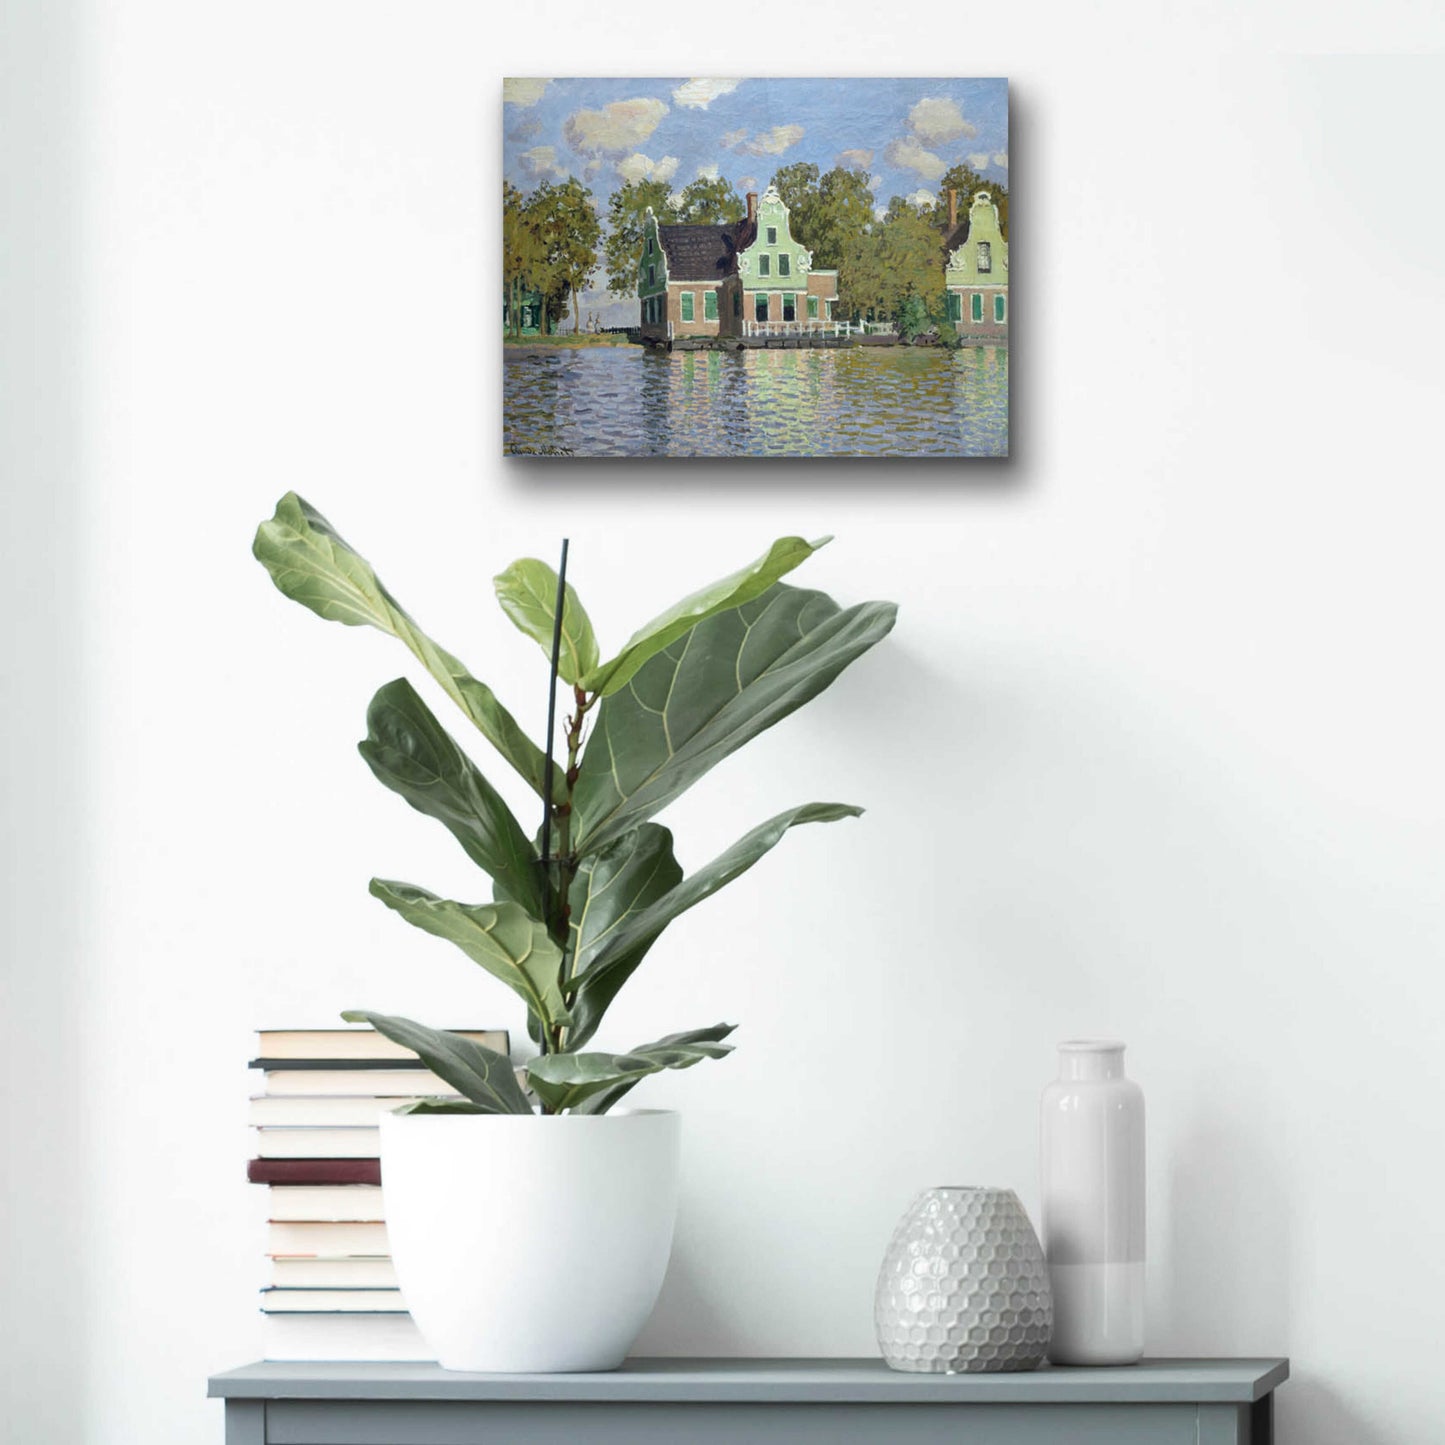 Epic Art 'Houses By The Bank Of The River Zaan' by Claude Monet, Acrylic Glass Wall Art,16x12